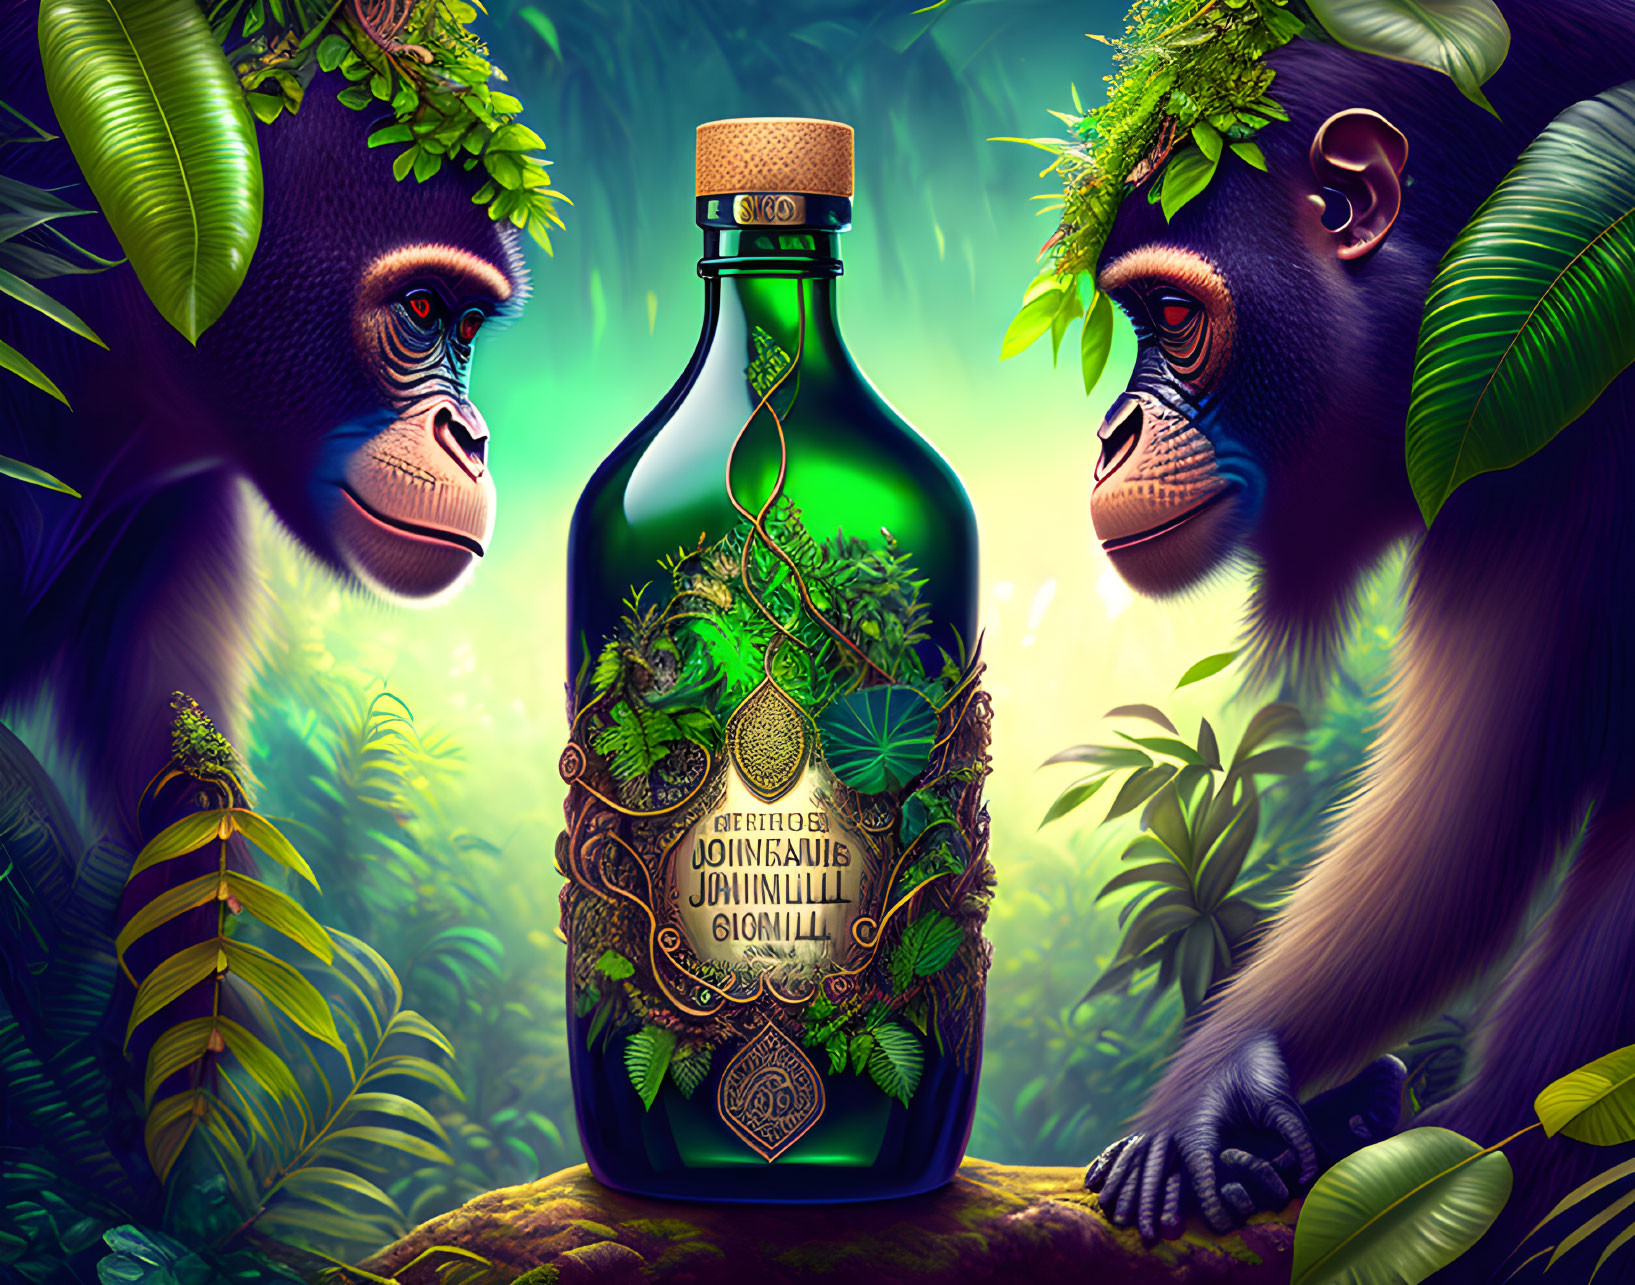 Gorillas with plant-themed bottle in jungle setting